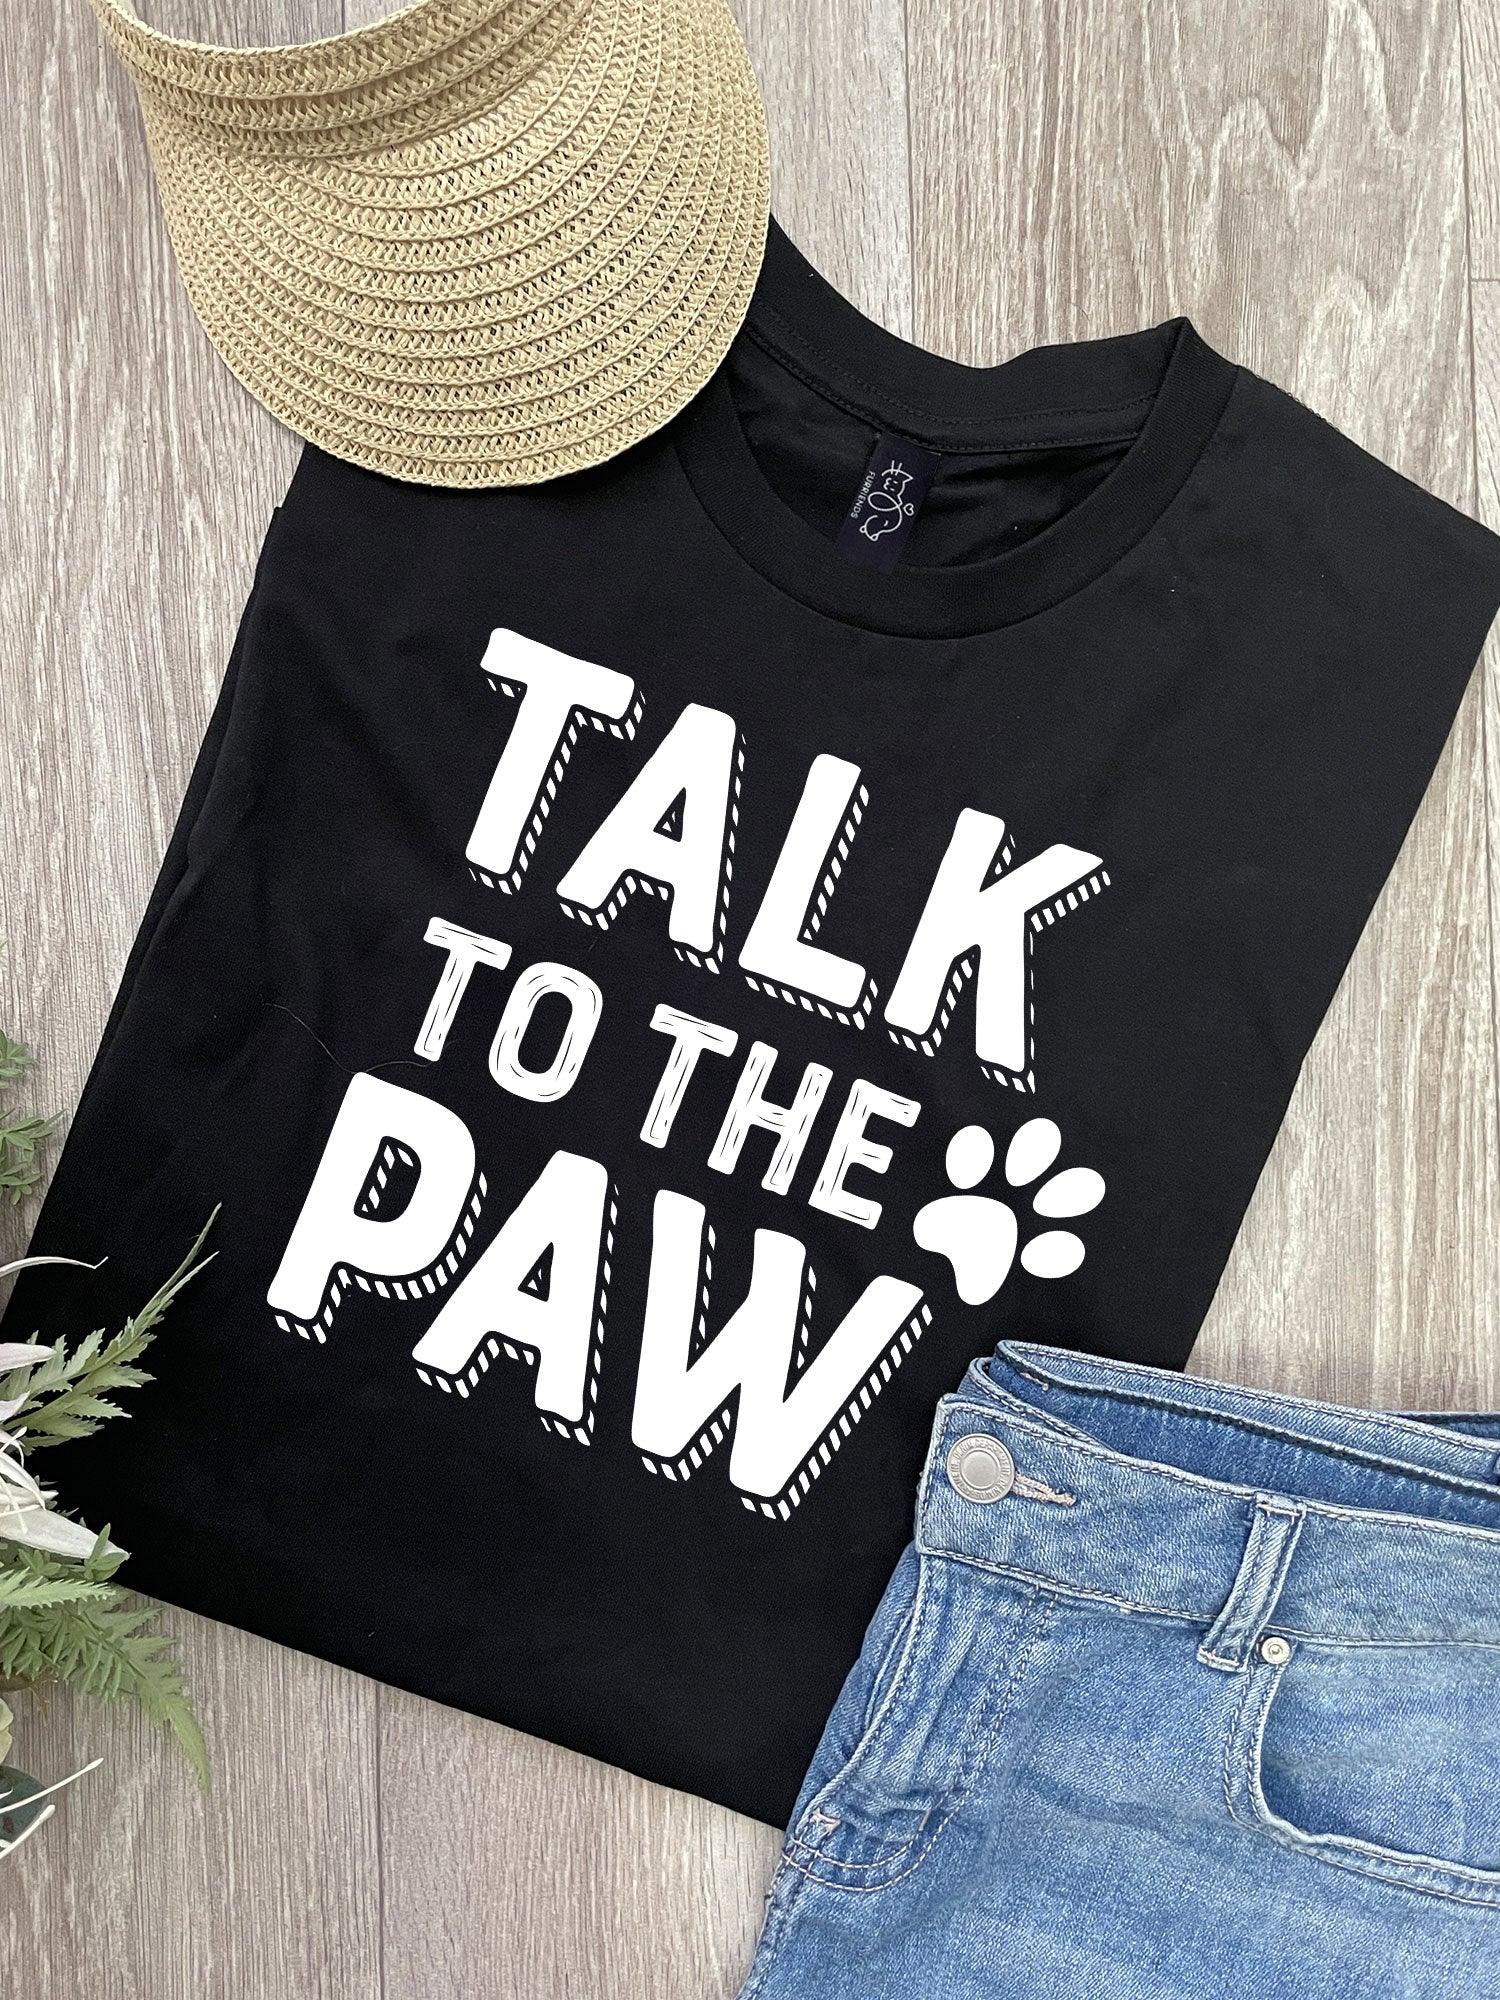 Talk To The Paw